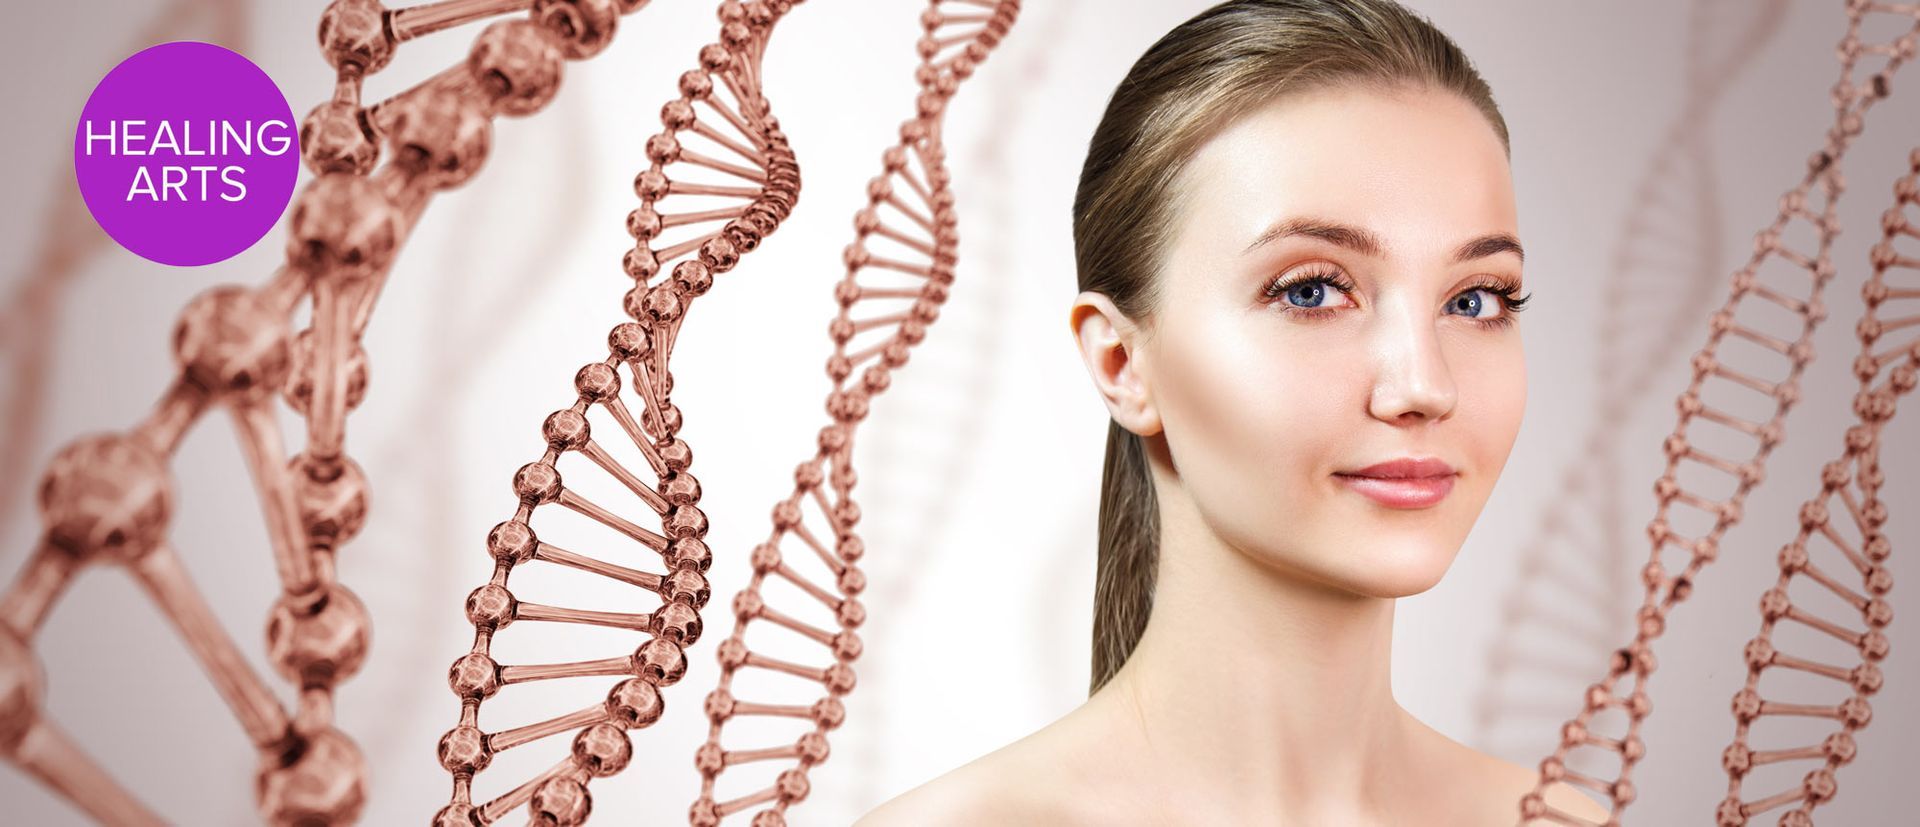 The Beauty of Stem Cell Rejuvenation. Stem cells are found throughout the body, but the other main place is in bone marrow. Once stimulated, they can go anywhere and become any new cell. They, indeed, are our internal fountain of youth.